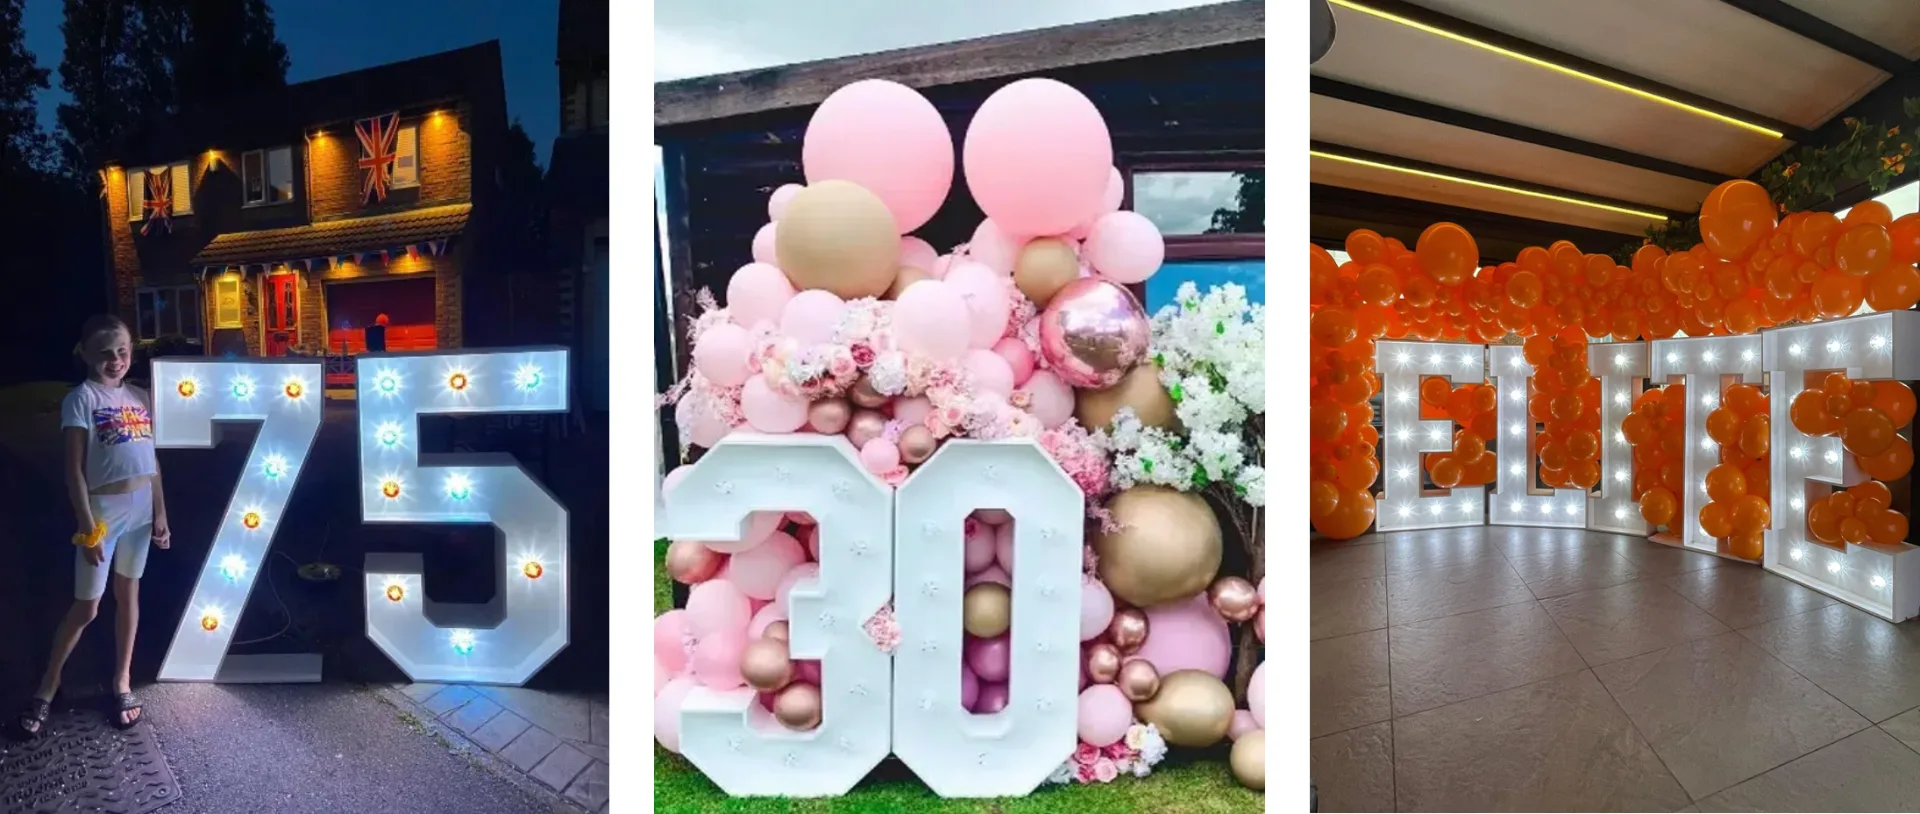 Oliver LED Numbers, Letter Numbers for Hire, Proposal and Engagement LED Letters for Hire, LED Letters for Hire for Events, LED PROM, LED Birthday and Event Letters, Name LEDs, Kids Birthday LED Letters and Numbers for Hire, 30th LED, 75th Birthday LED Numbers and Letters